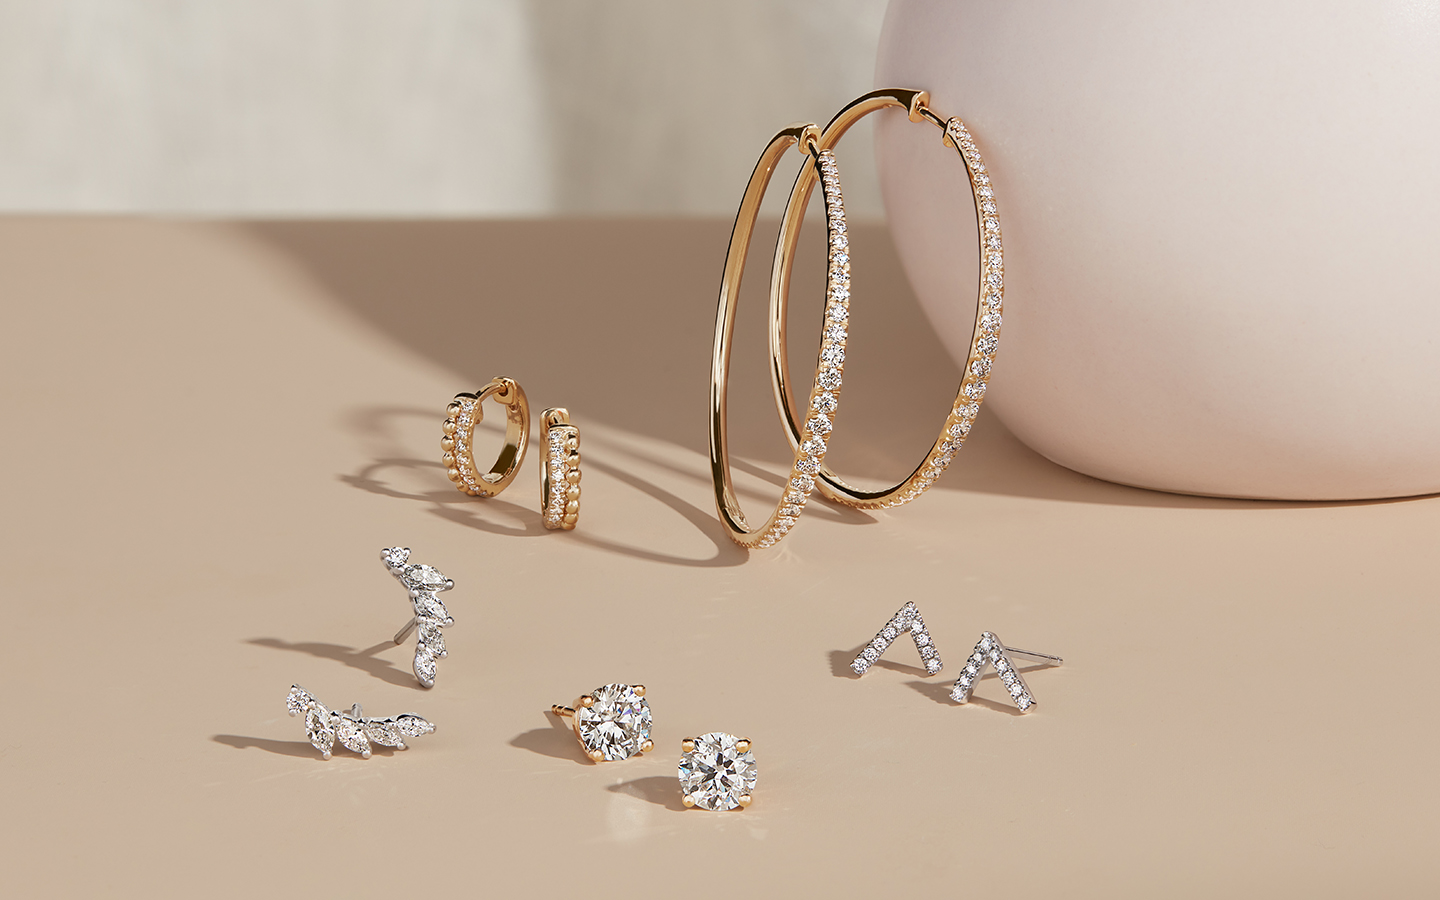 Five pairs of gold and diamond earrings including hoops and studs in yellow and white gold.